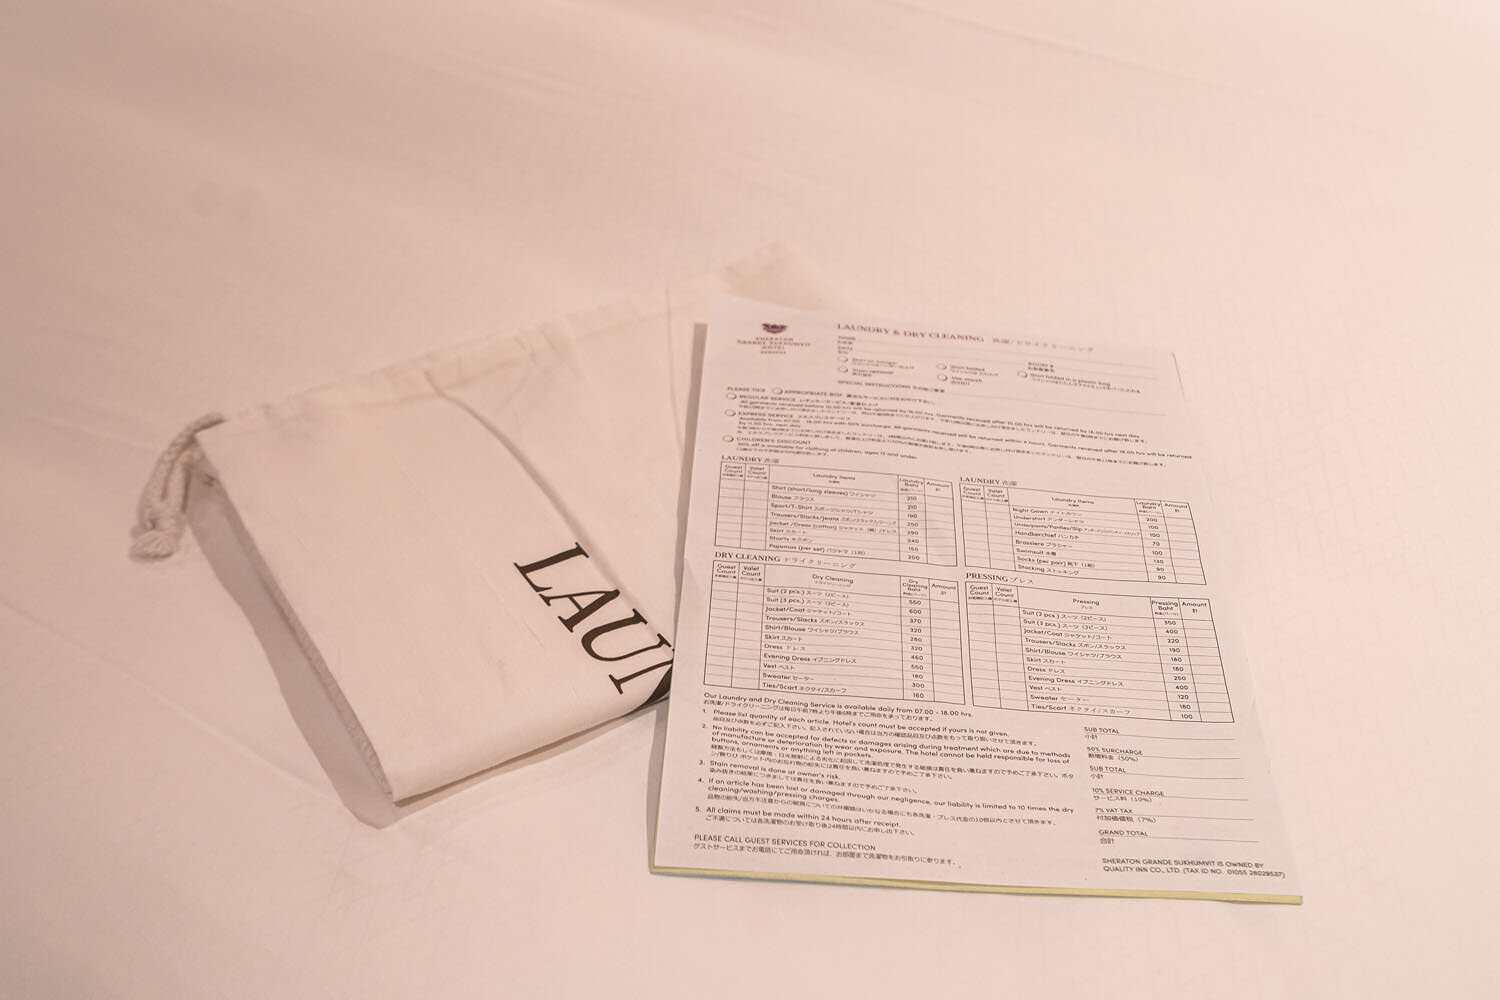  Laundry bag and checklist 